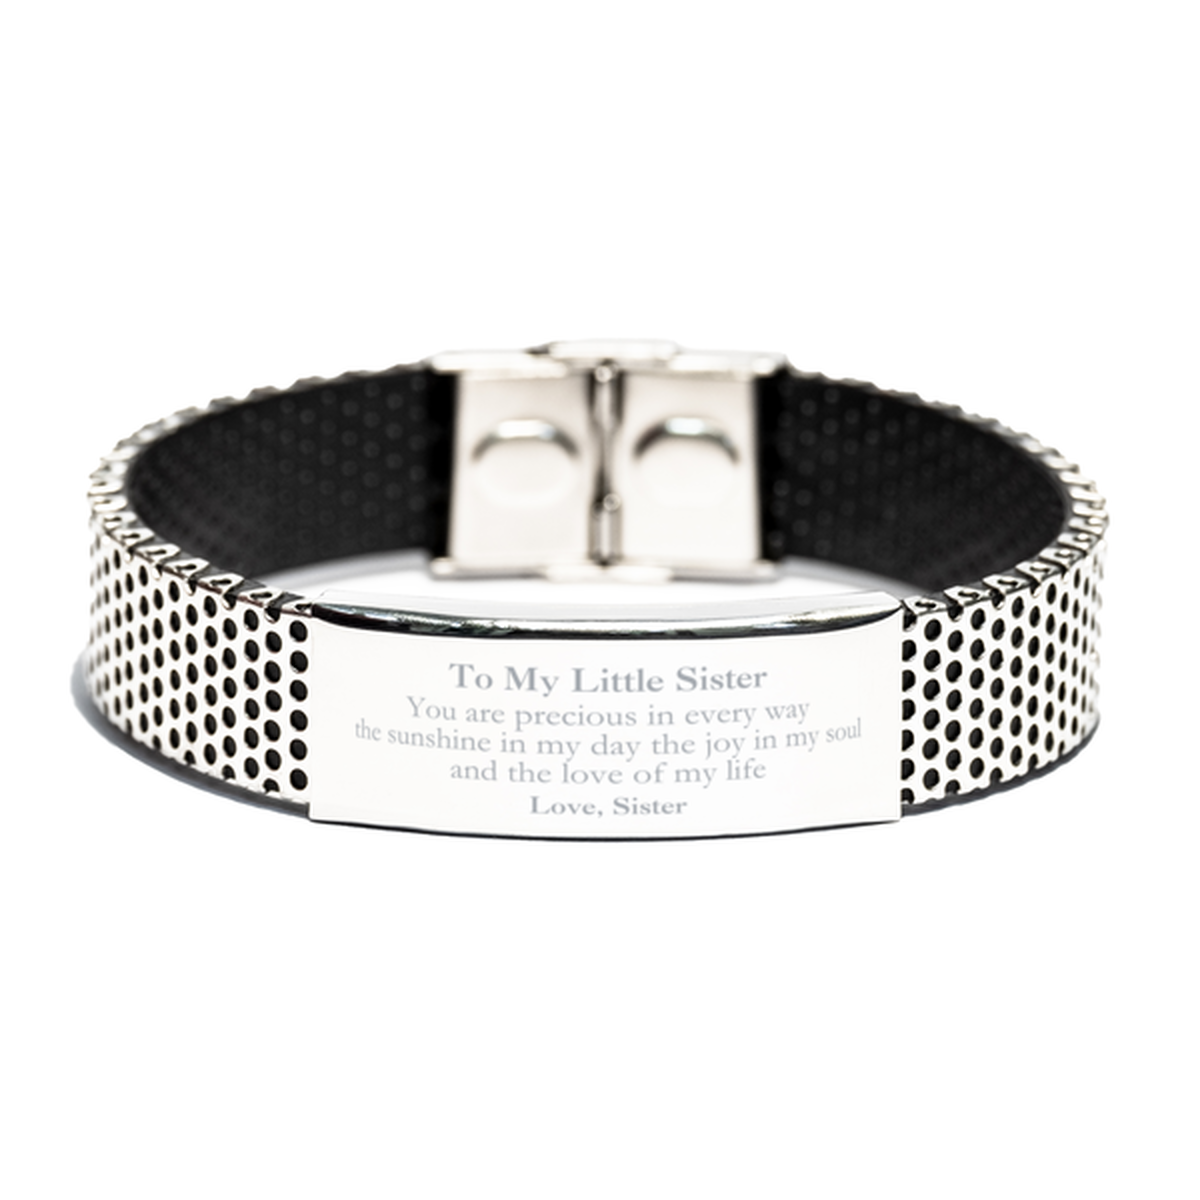 Graduation Gifts for Little Sister Stainless Steel Bracelet Present from Sister, Christmas Little Sister Birthday Gifts Little Sister You are precious in every way the sunshine in my day. Love, Sister